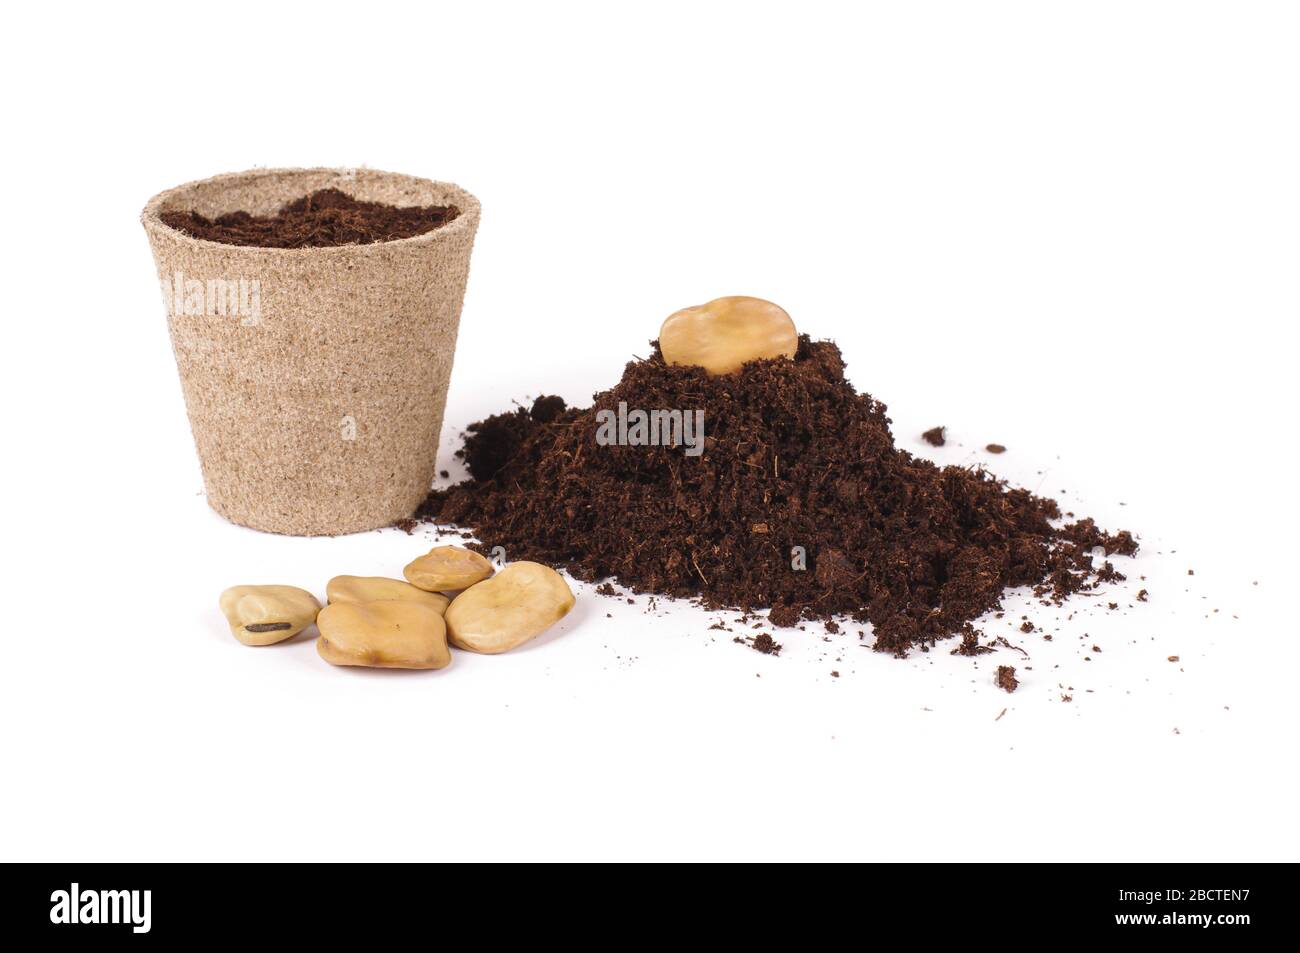 Concept of agriculture in which you can see seeds, heap of soil and peat pots Stock Photo